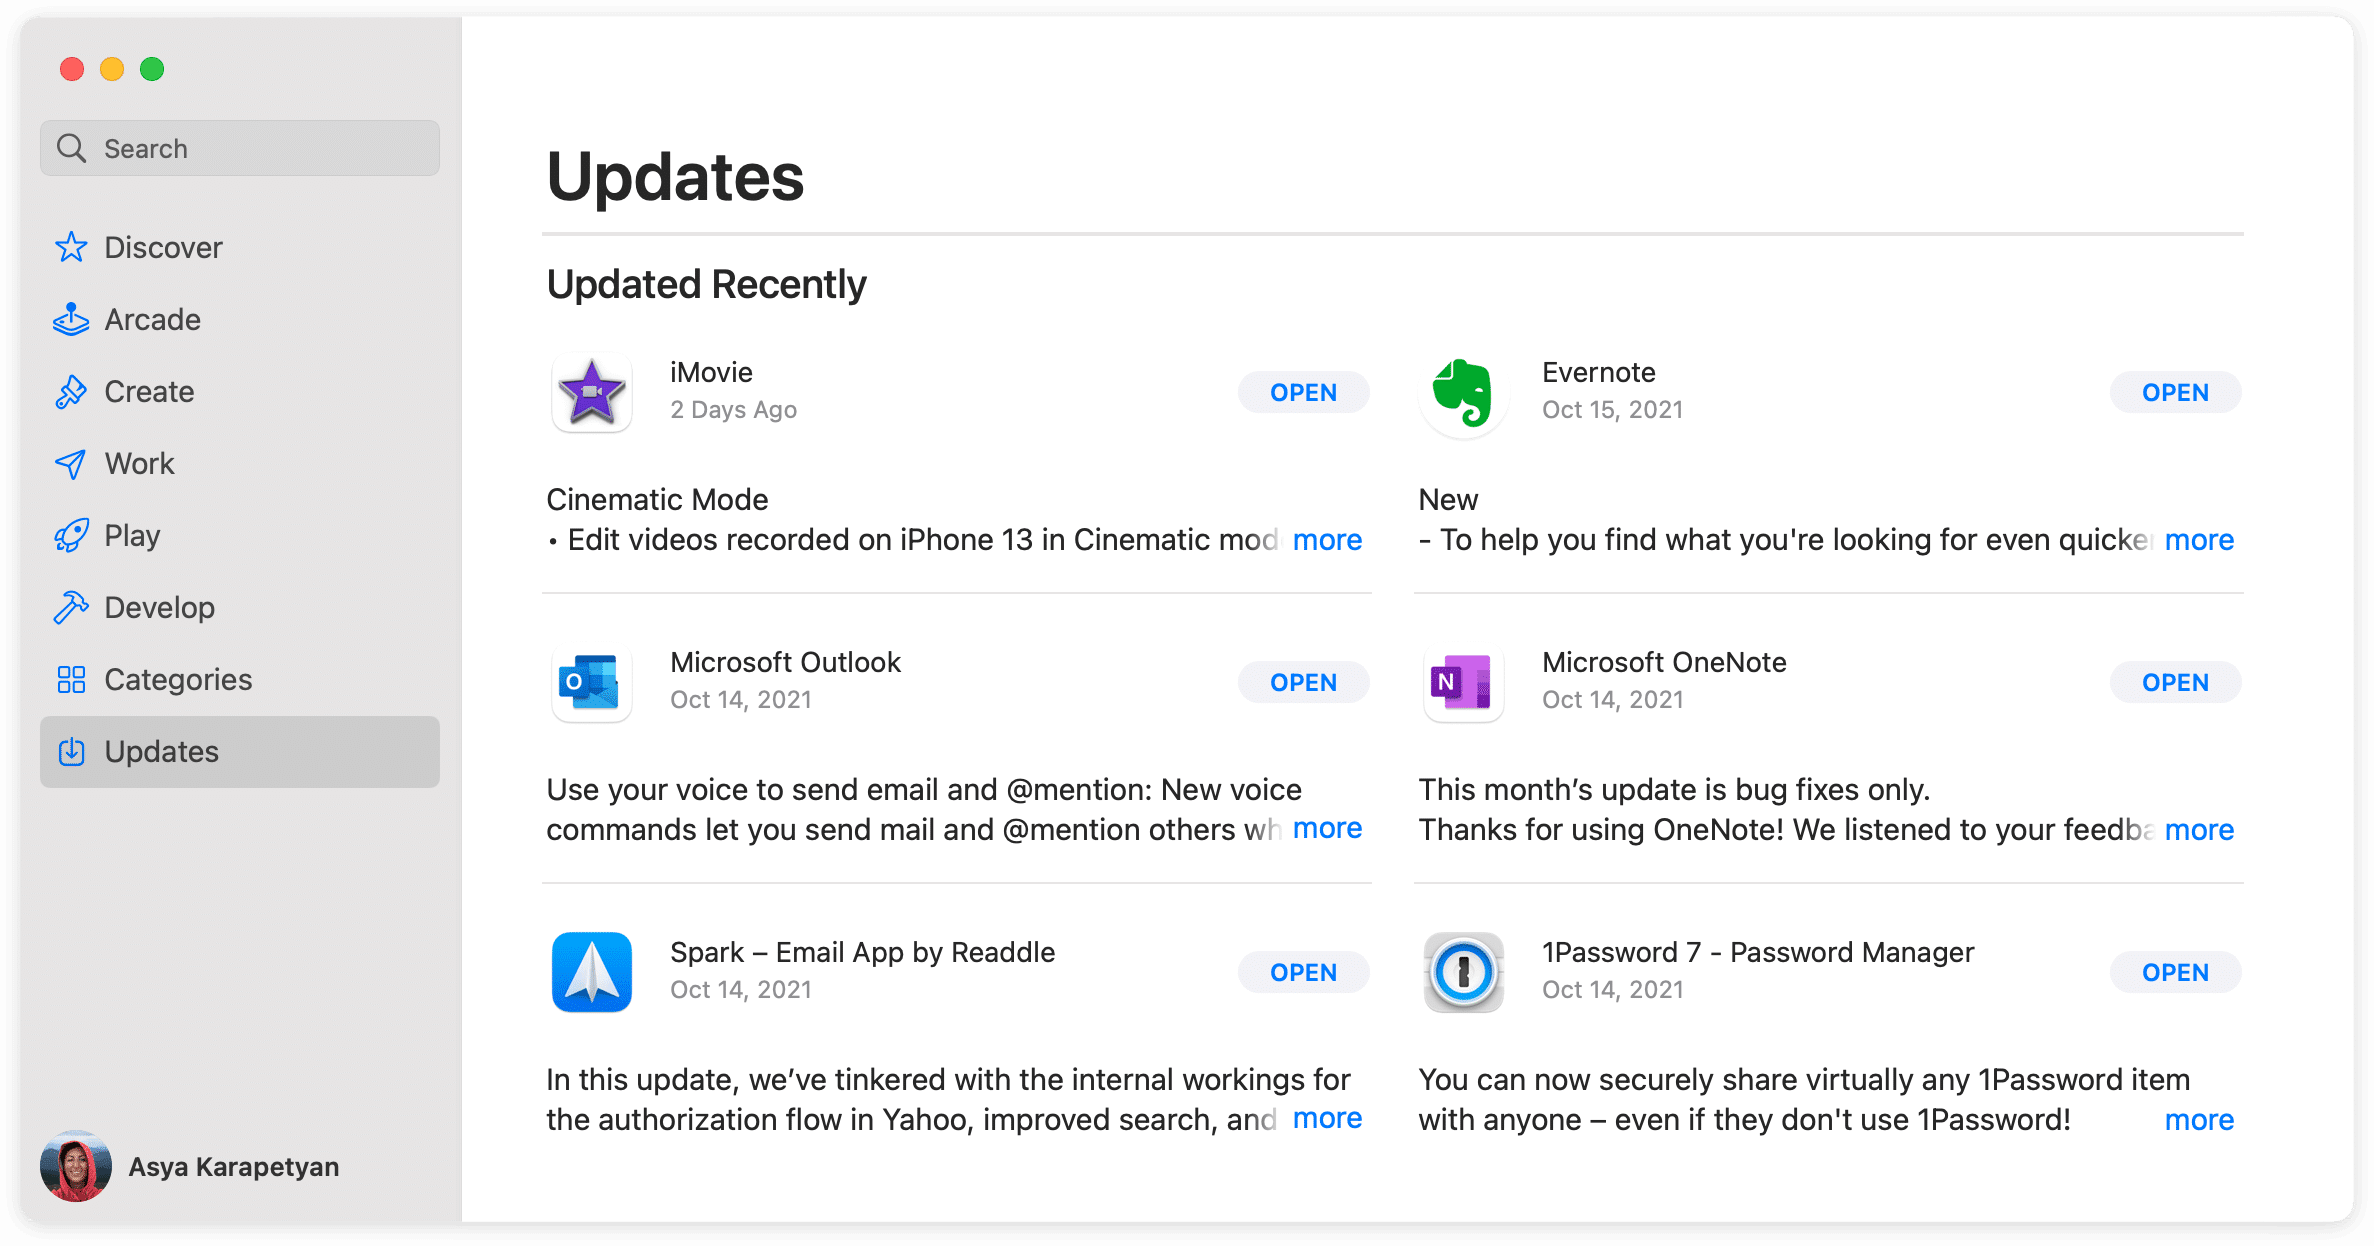 App Store window showing the Updates section